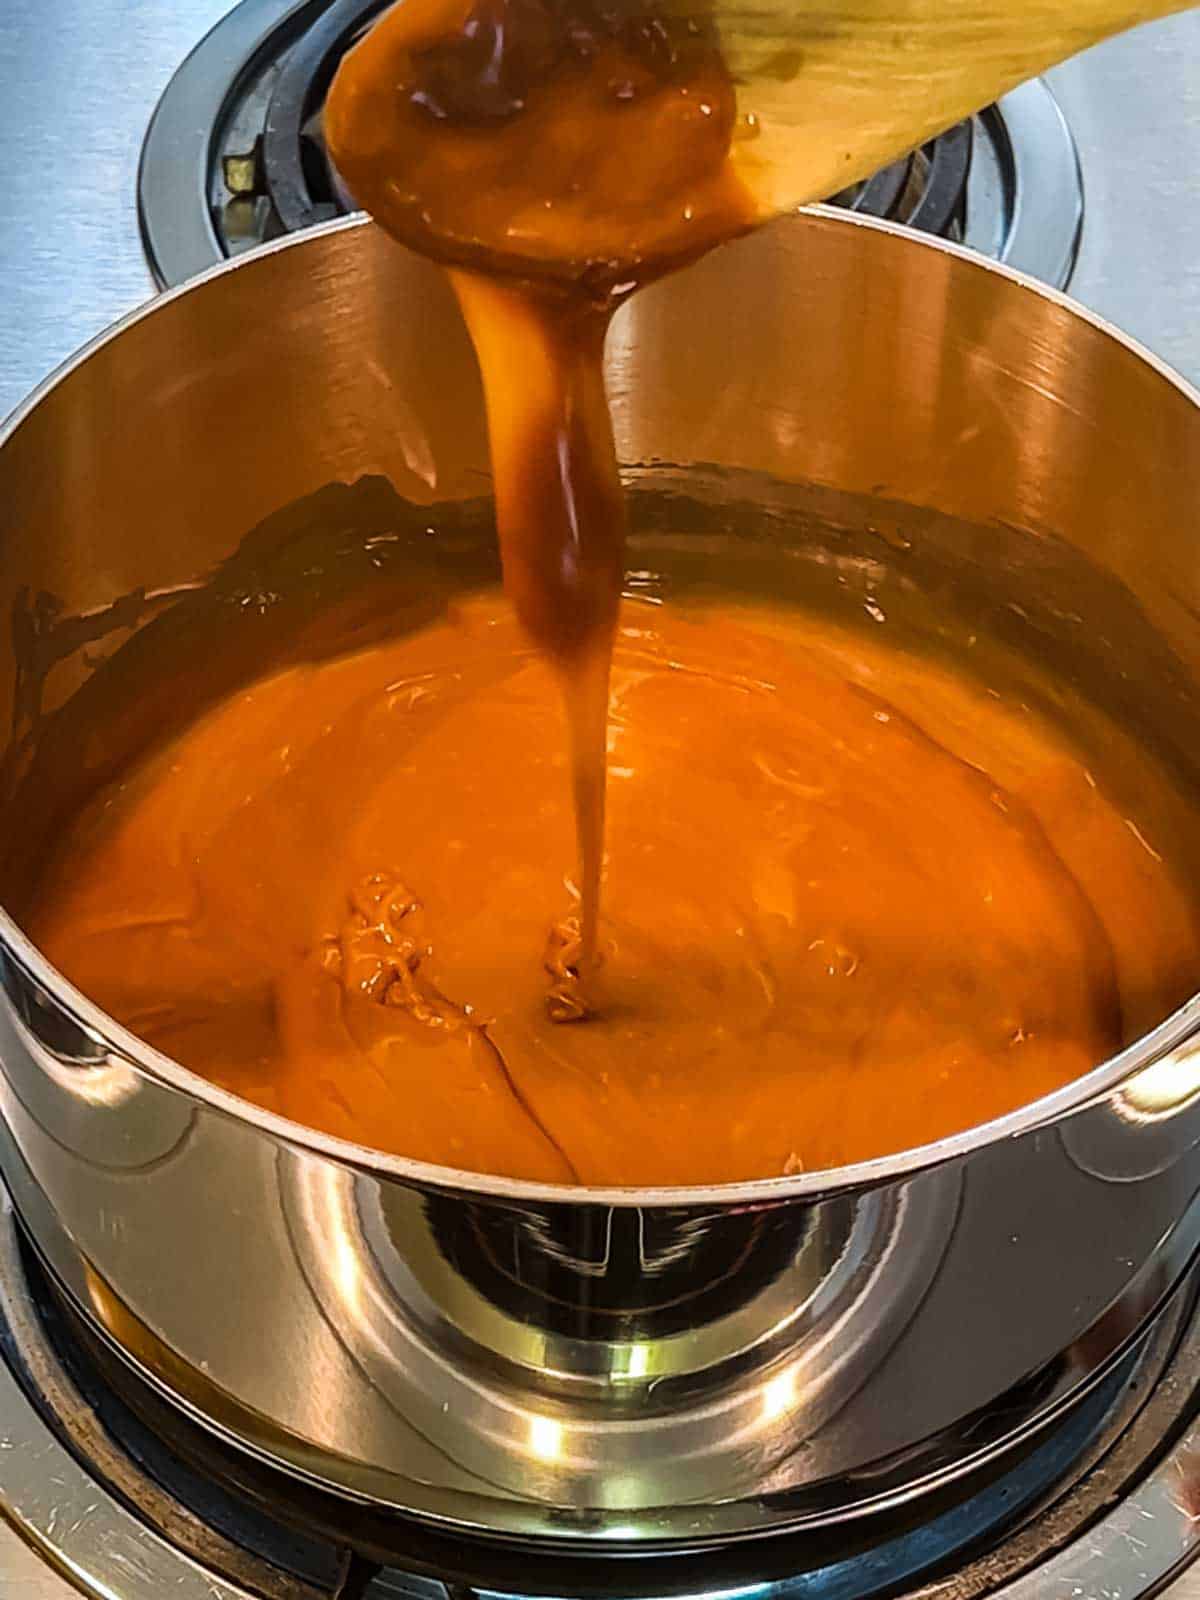 Melted Caramel bits with water.